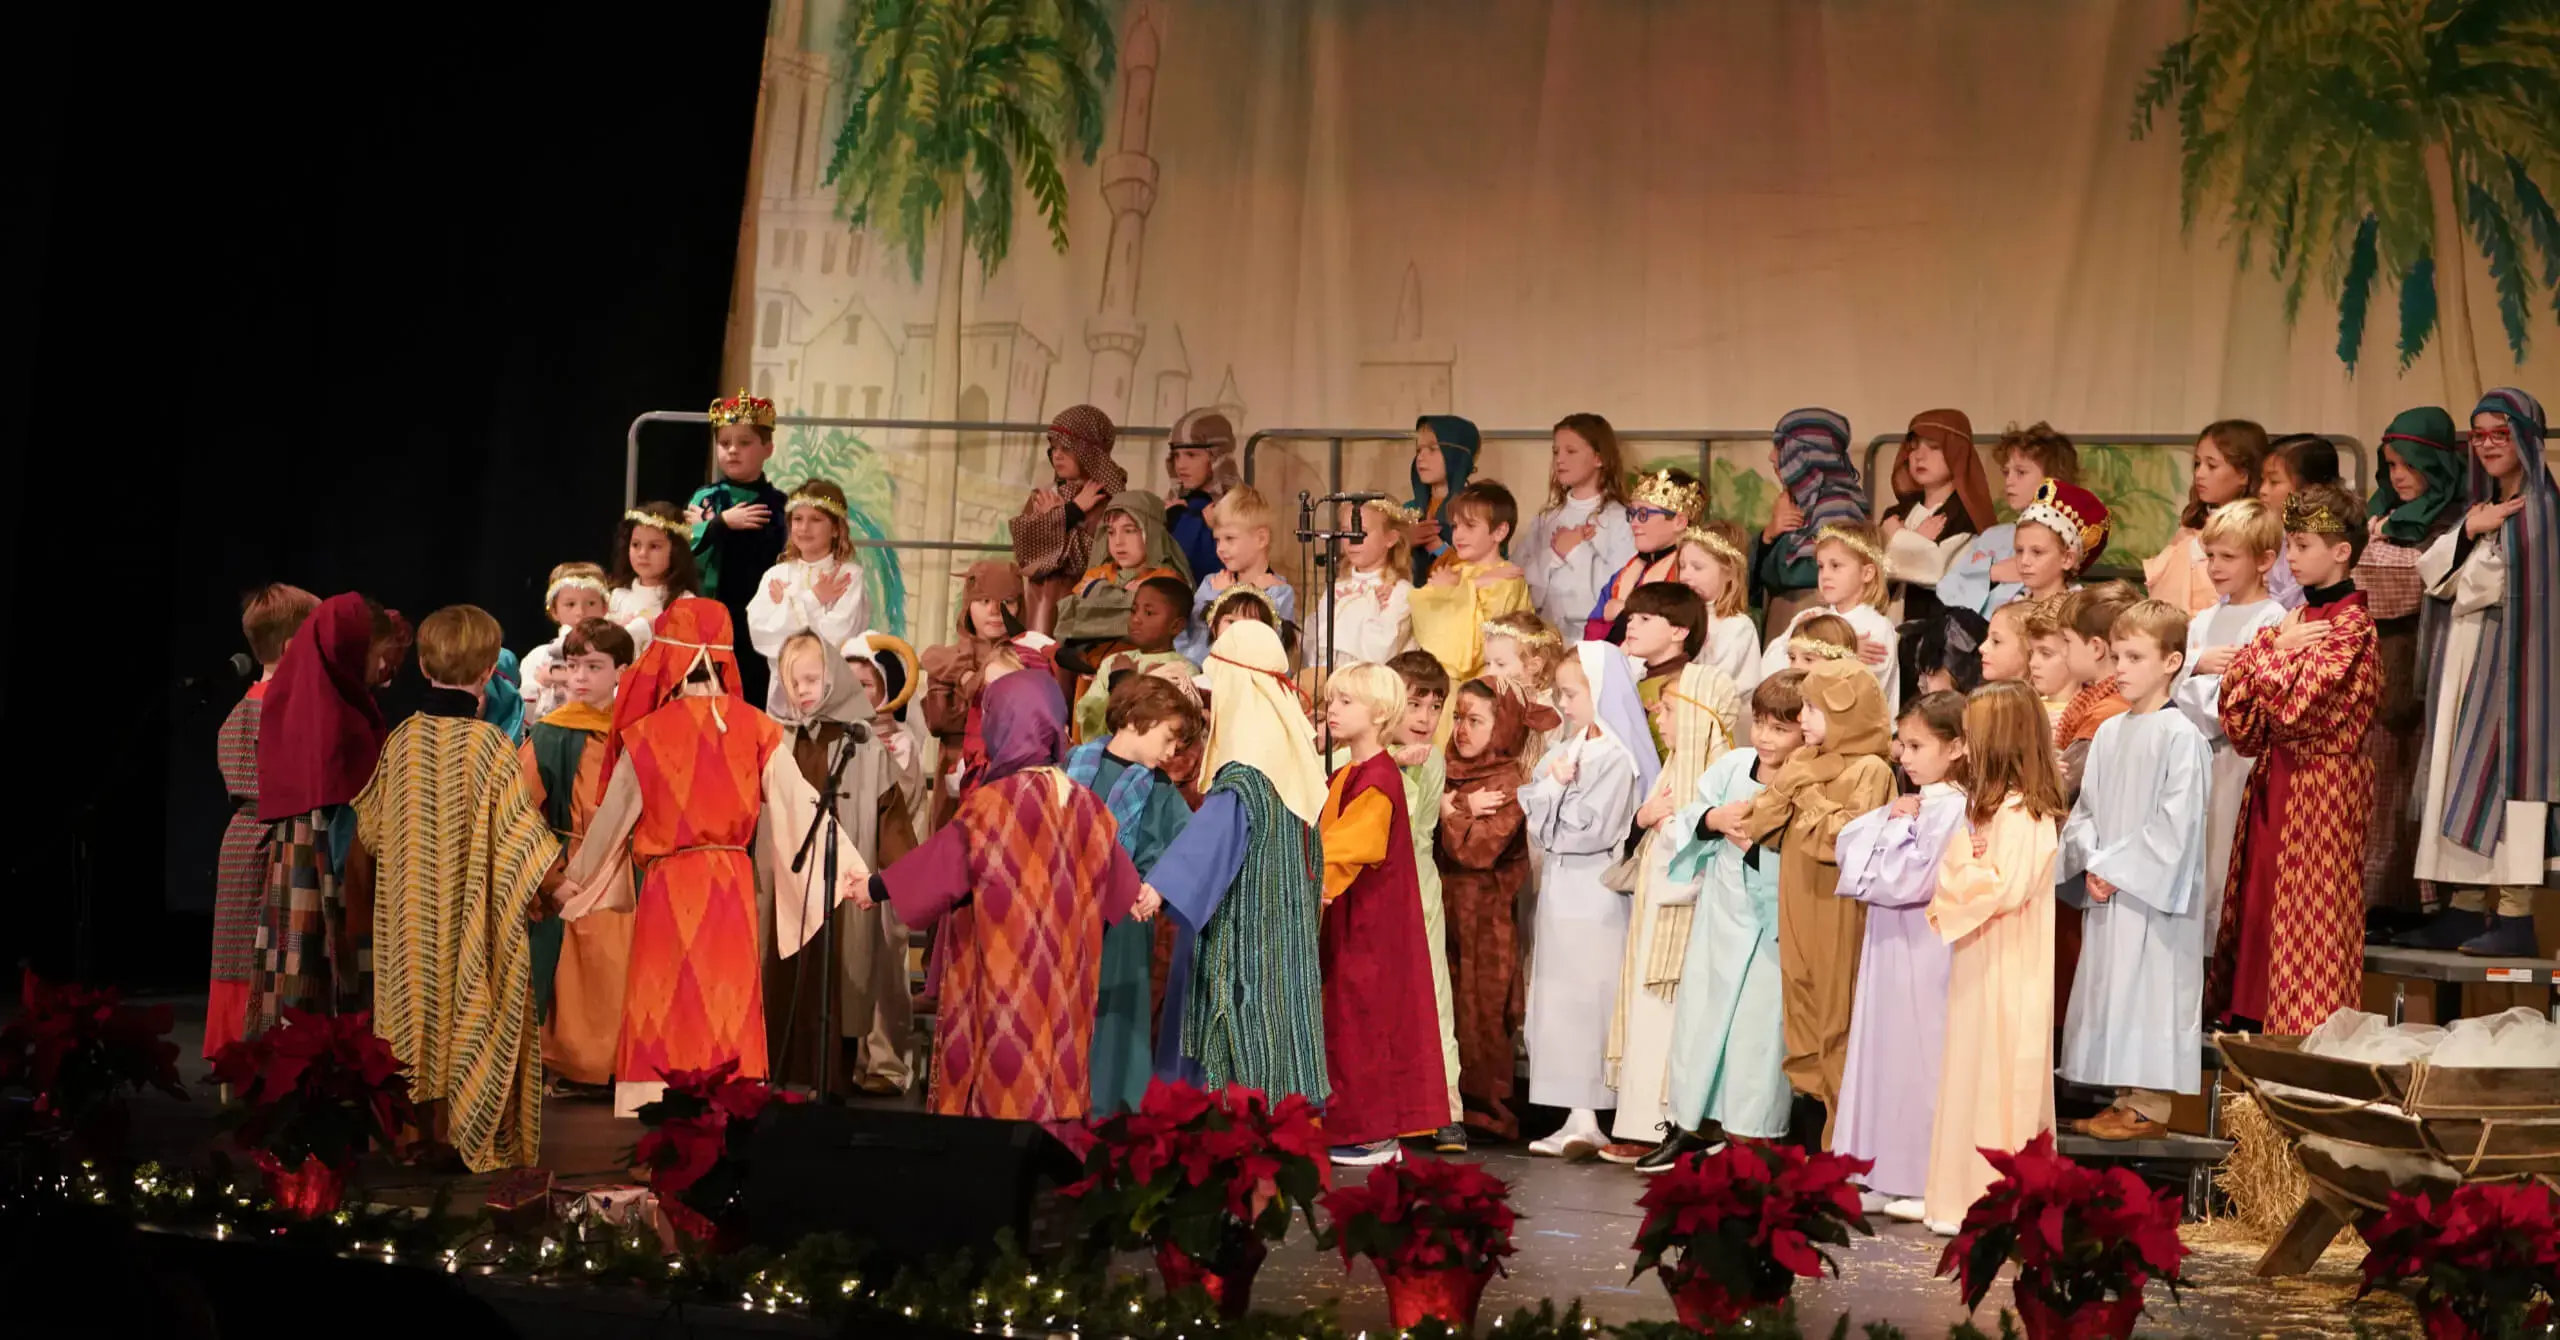 Porter-Gaud students performing in a Nativity play